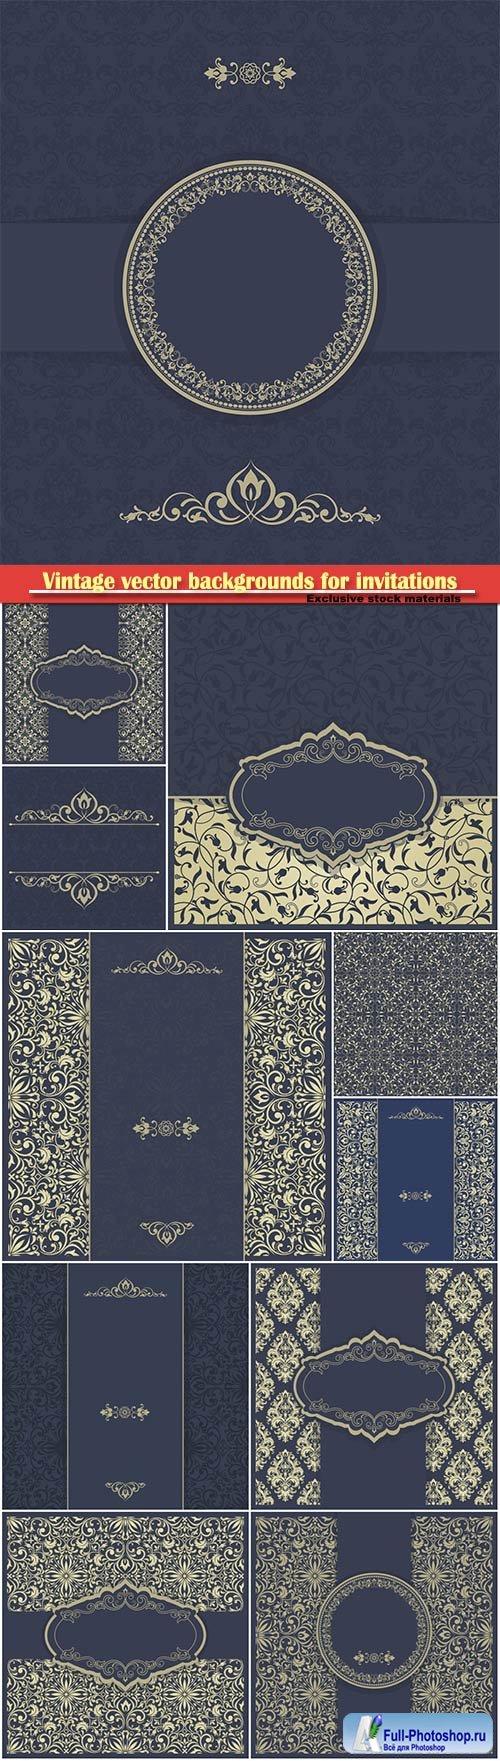 Vintage vector backgrounds for invitations with beautiful patterns